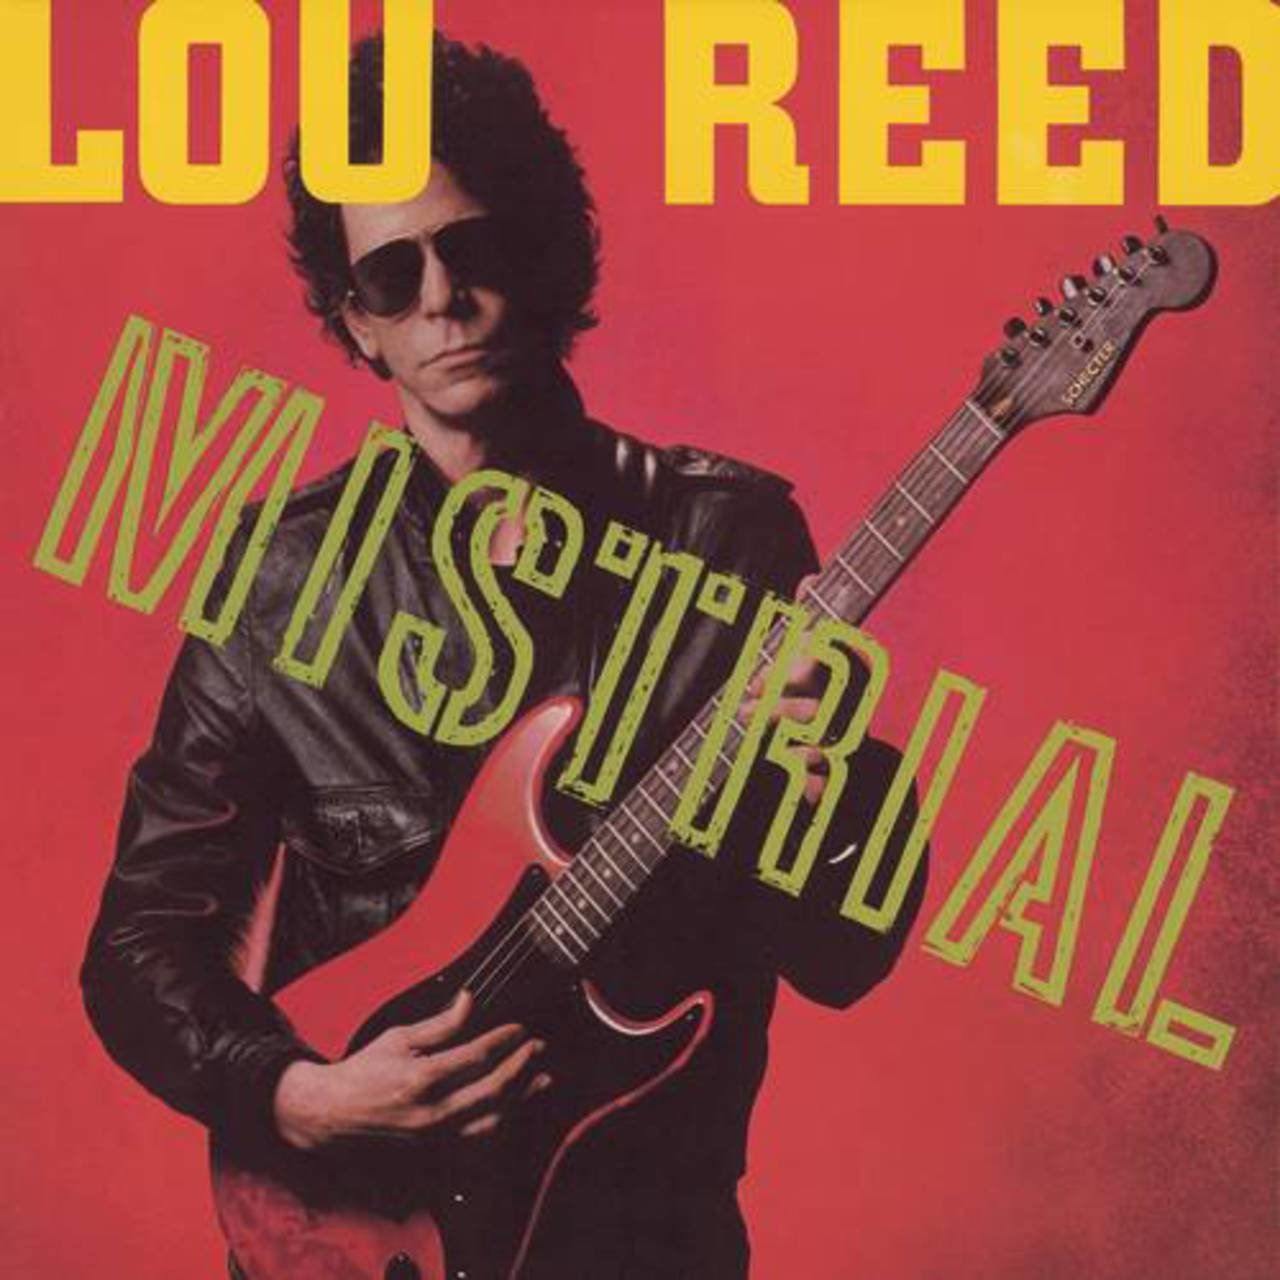 Mistrial (Lou Reed – Artist Of The Year Part 17)